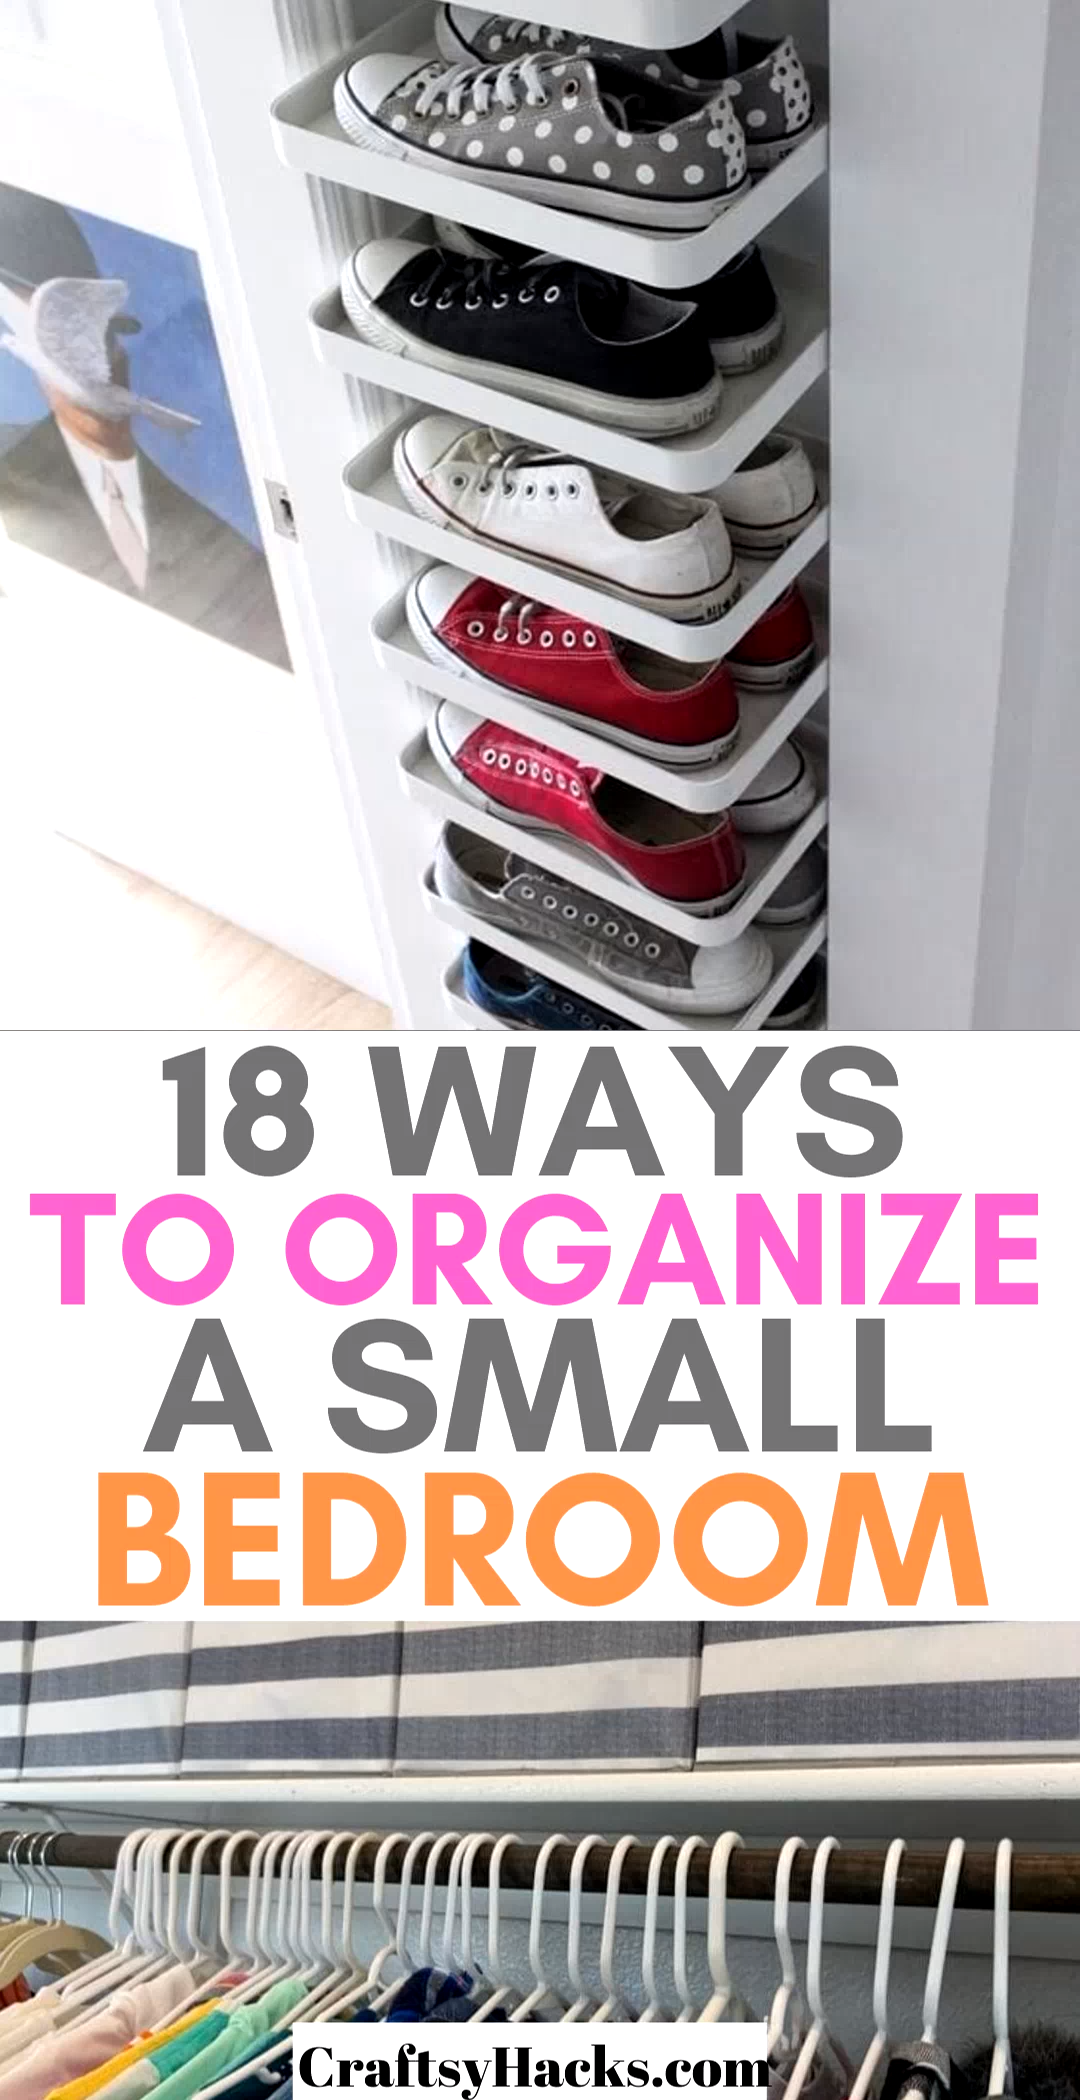 18 Ways to Organize a Small Bedroom - 18 Ways to Organize a Small Bedroom -   diy Organization chambre